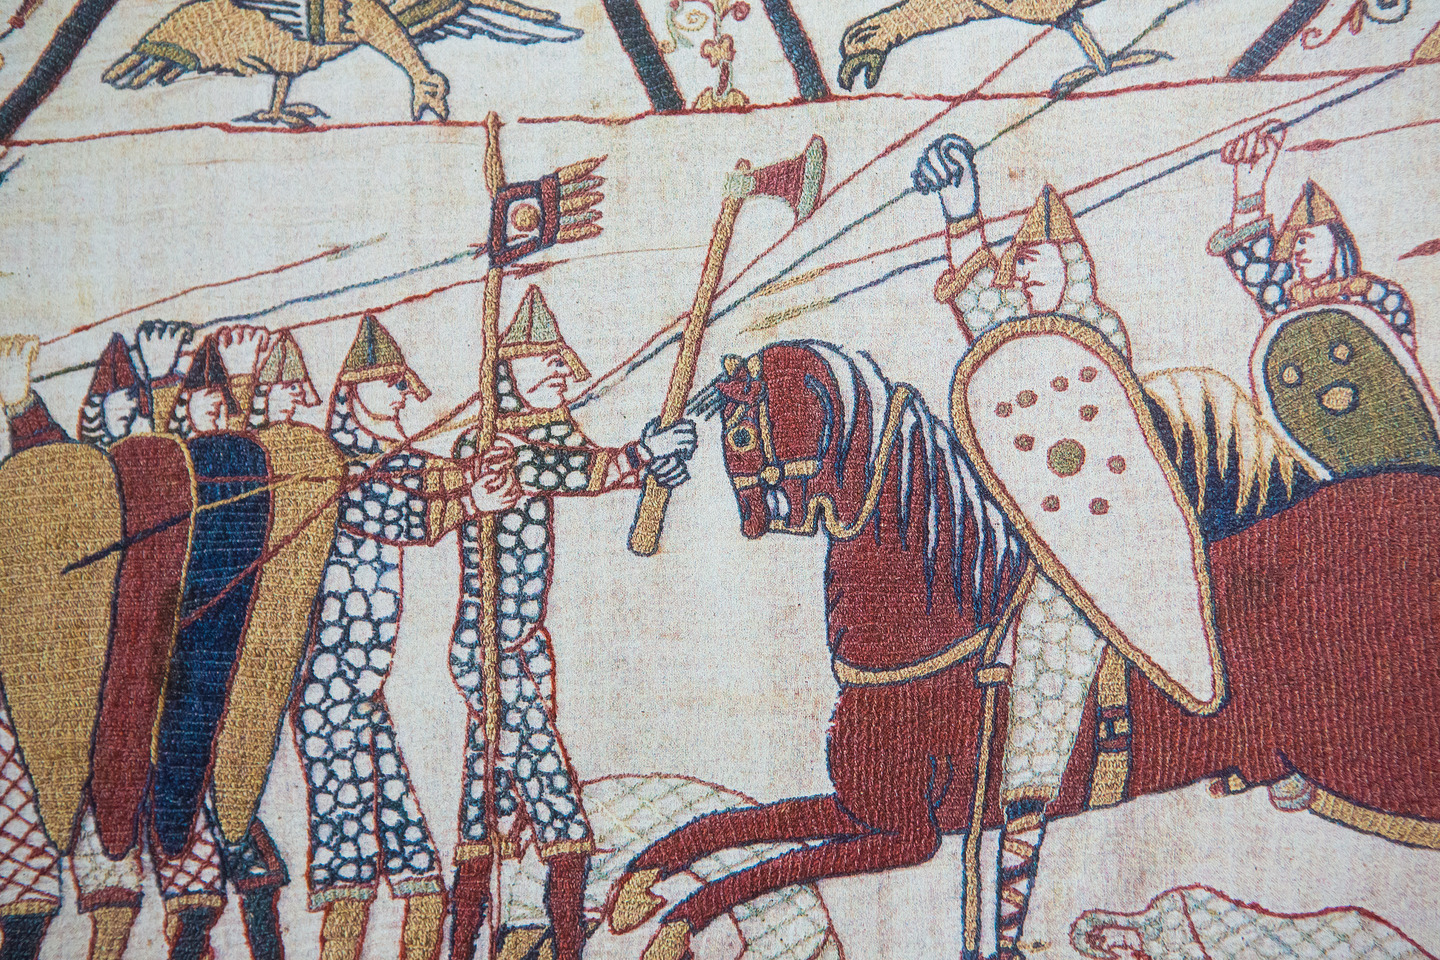 Artificial intelligence without ethics is likely to favor quantity of data over quality - just like the Bayeux Tapestry.